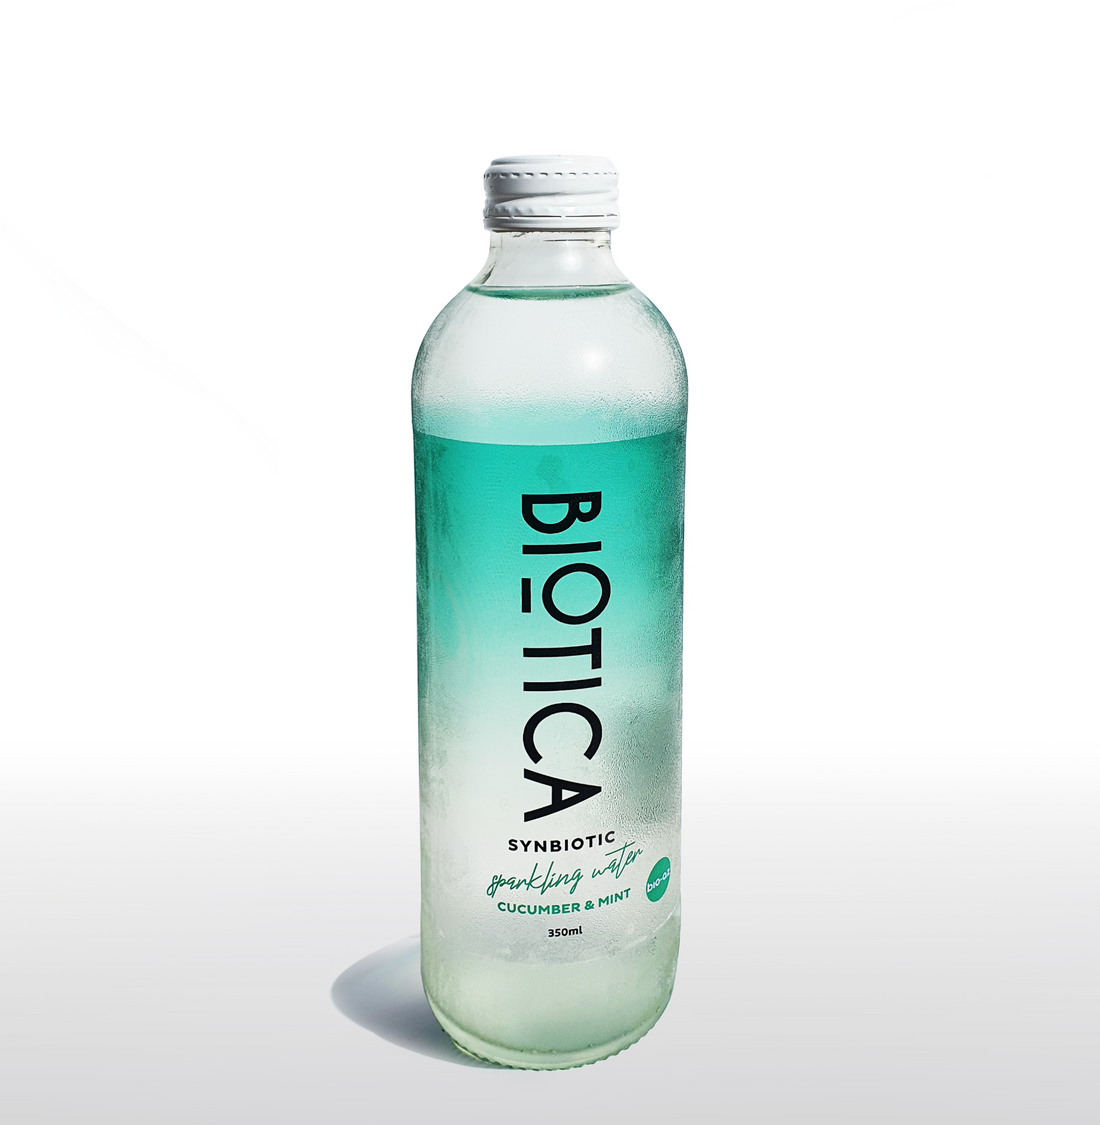 Probiotic Drink Cucumber and Mint Biotica Synbiotic Sparkling Water Glass Bottle (350ml x 12)